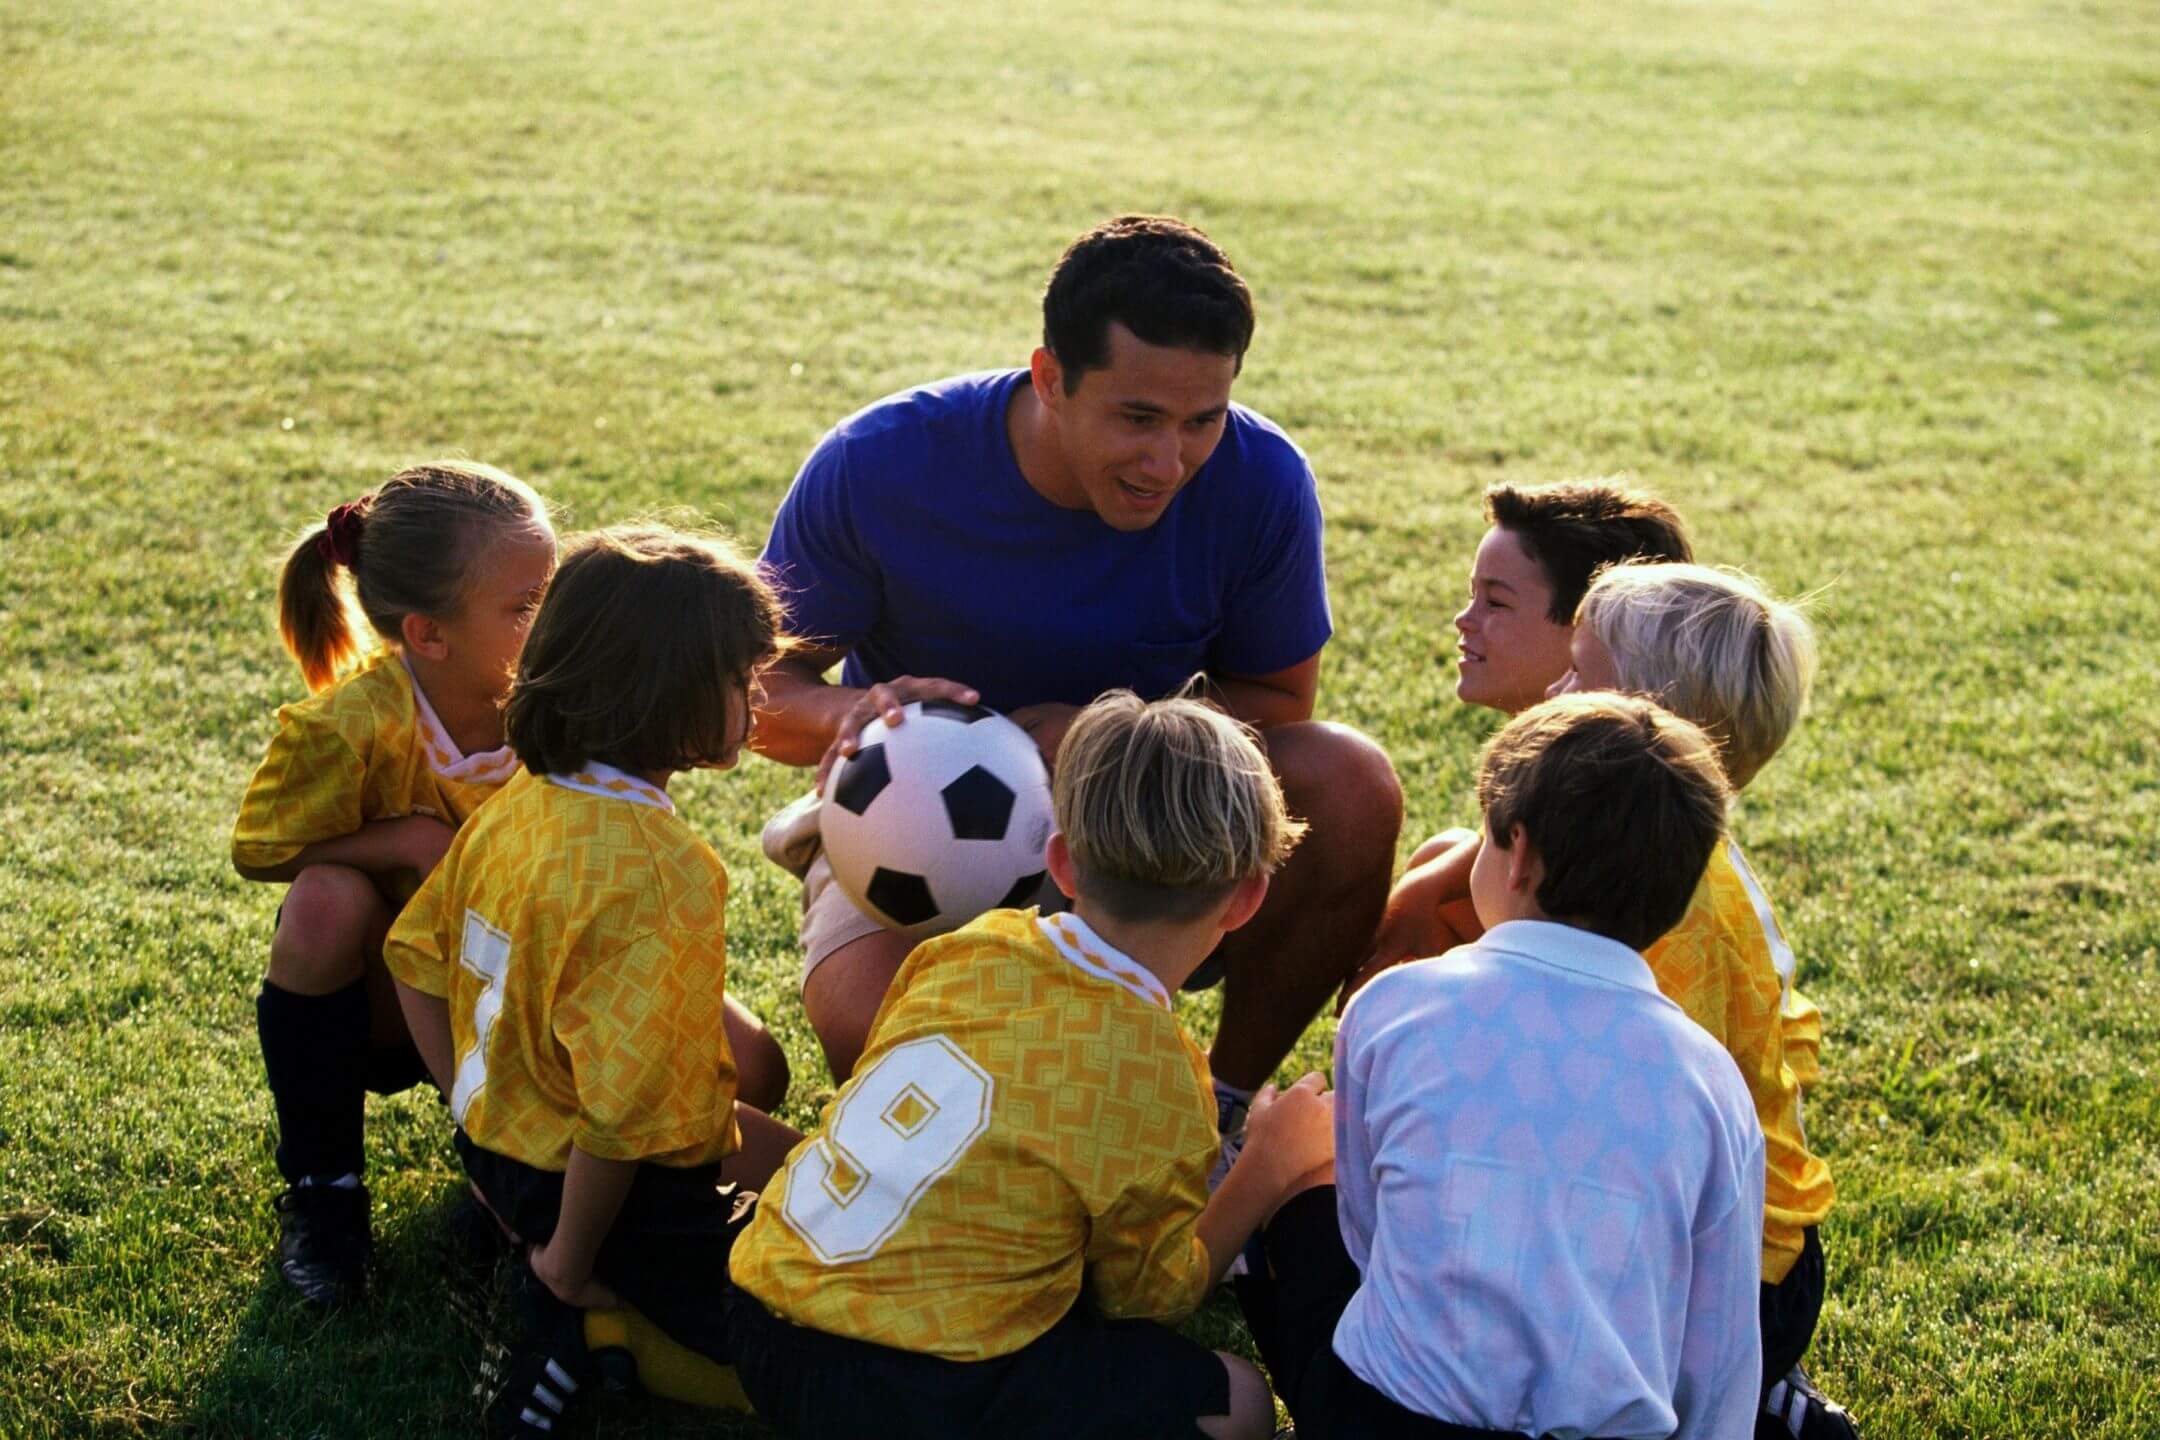 A group of young children sitting around a soccer ball.